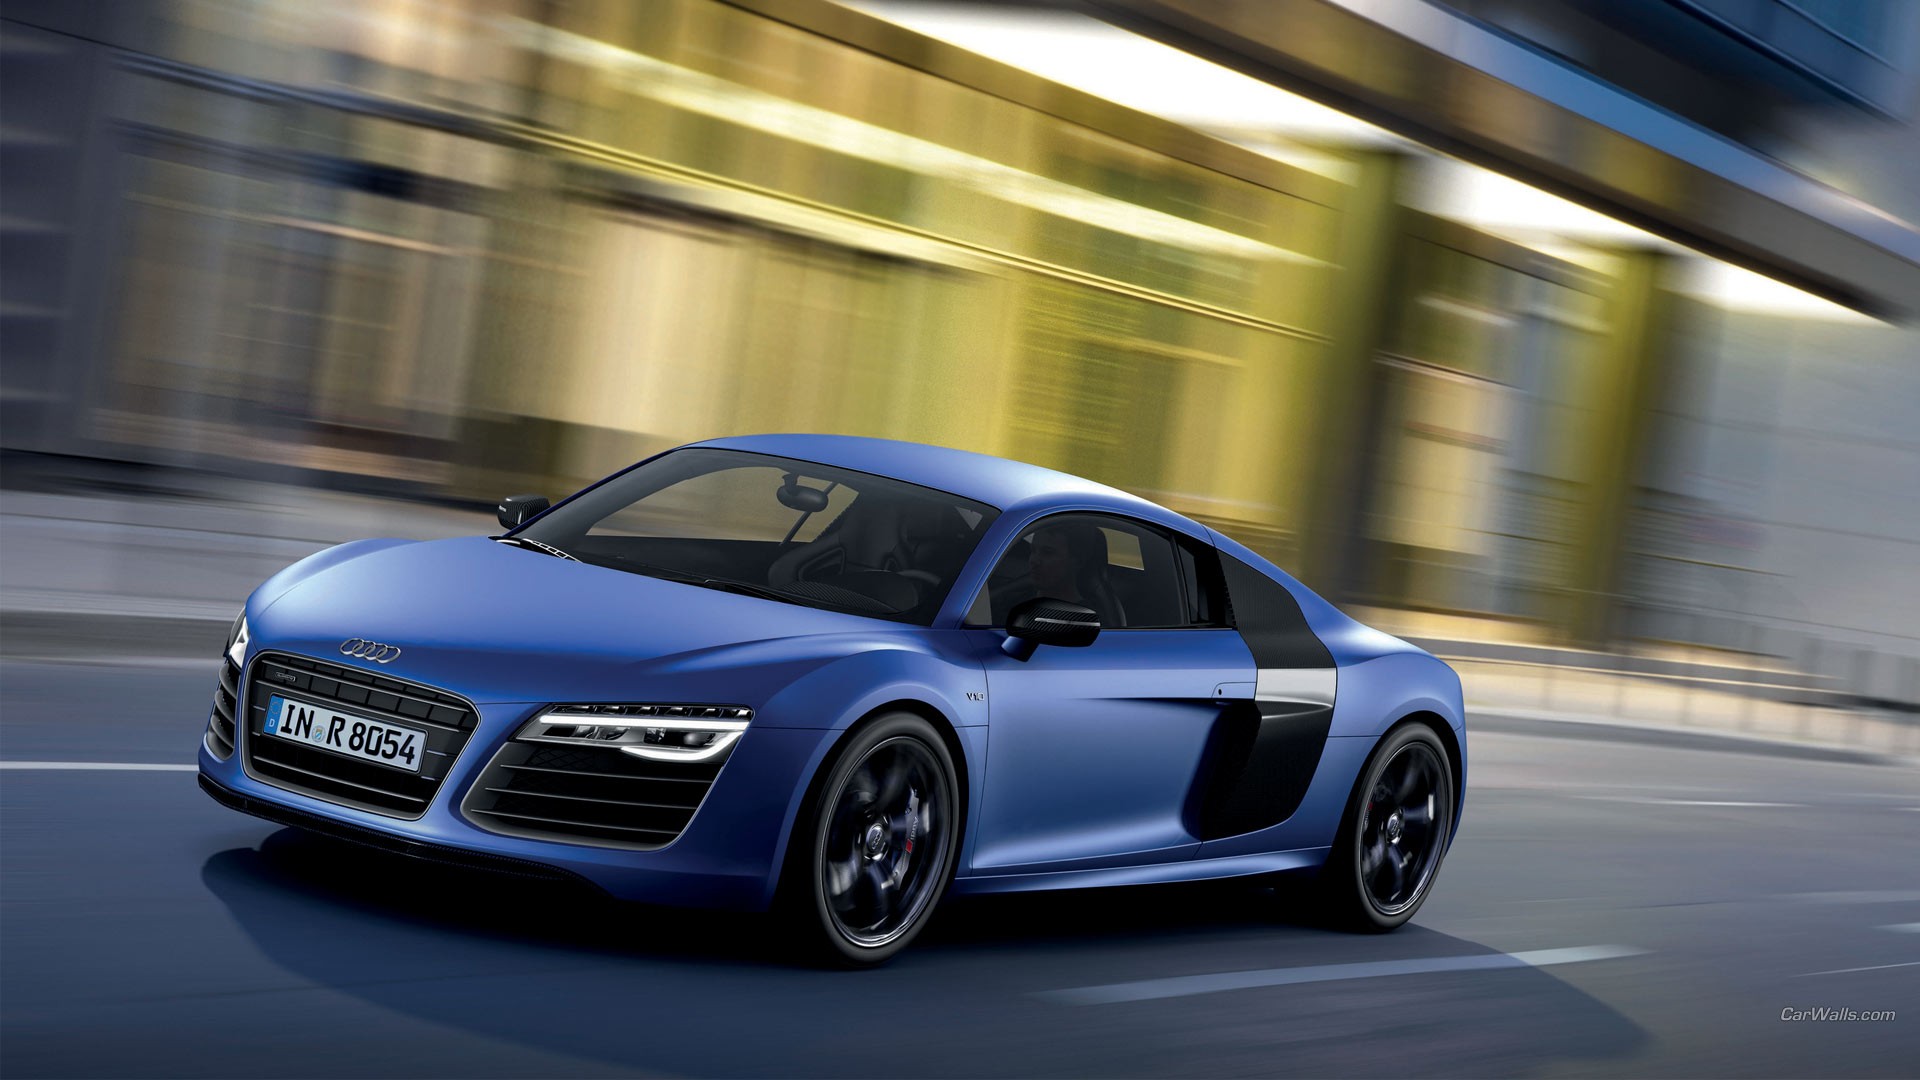 General 1920x1080 Audi R8 Audi blue cars vehicle car frontal view numbers supercars German cars Volkswagen Group